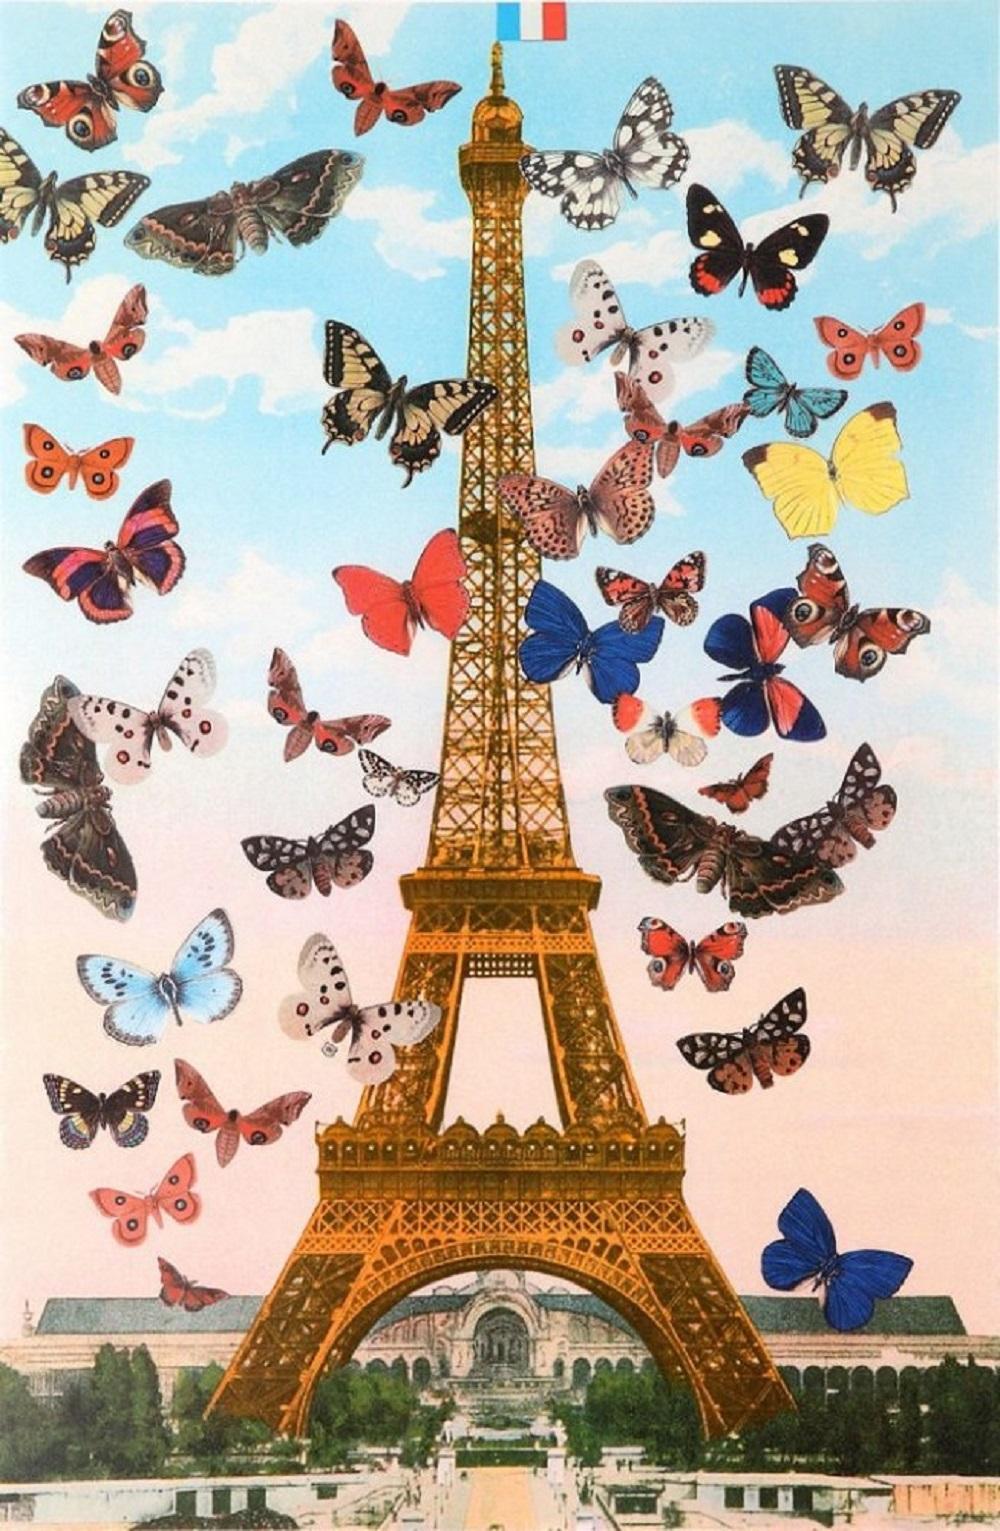 Eiffel Tower (2010) (signed) - Print by Peter Blake